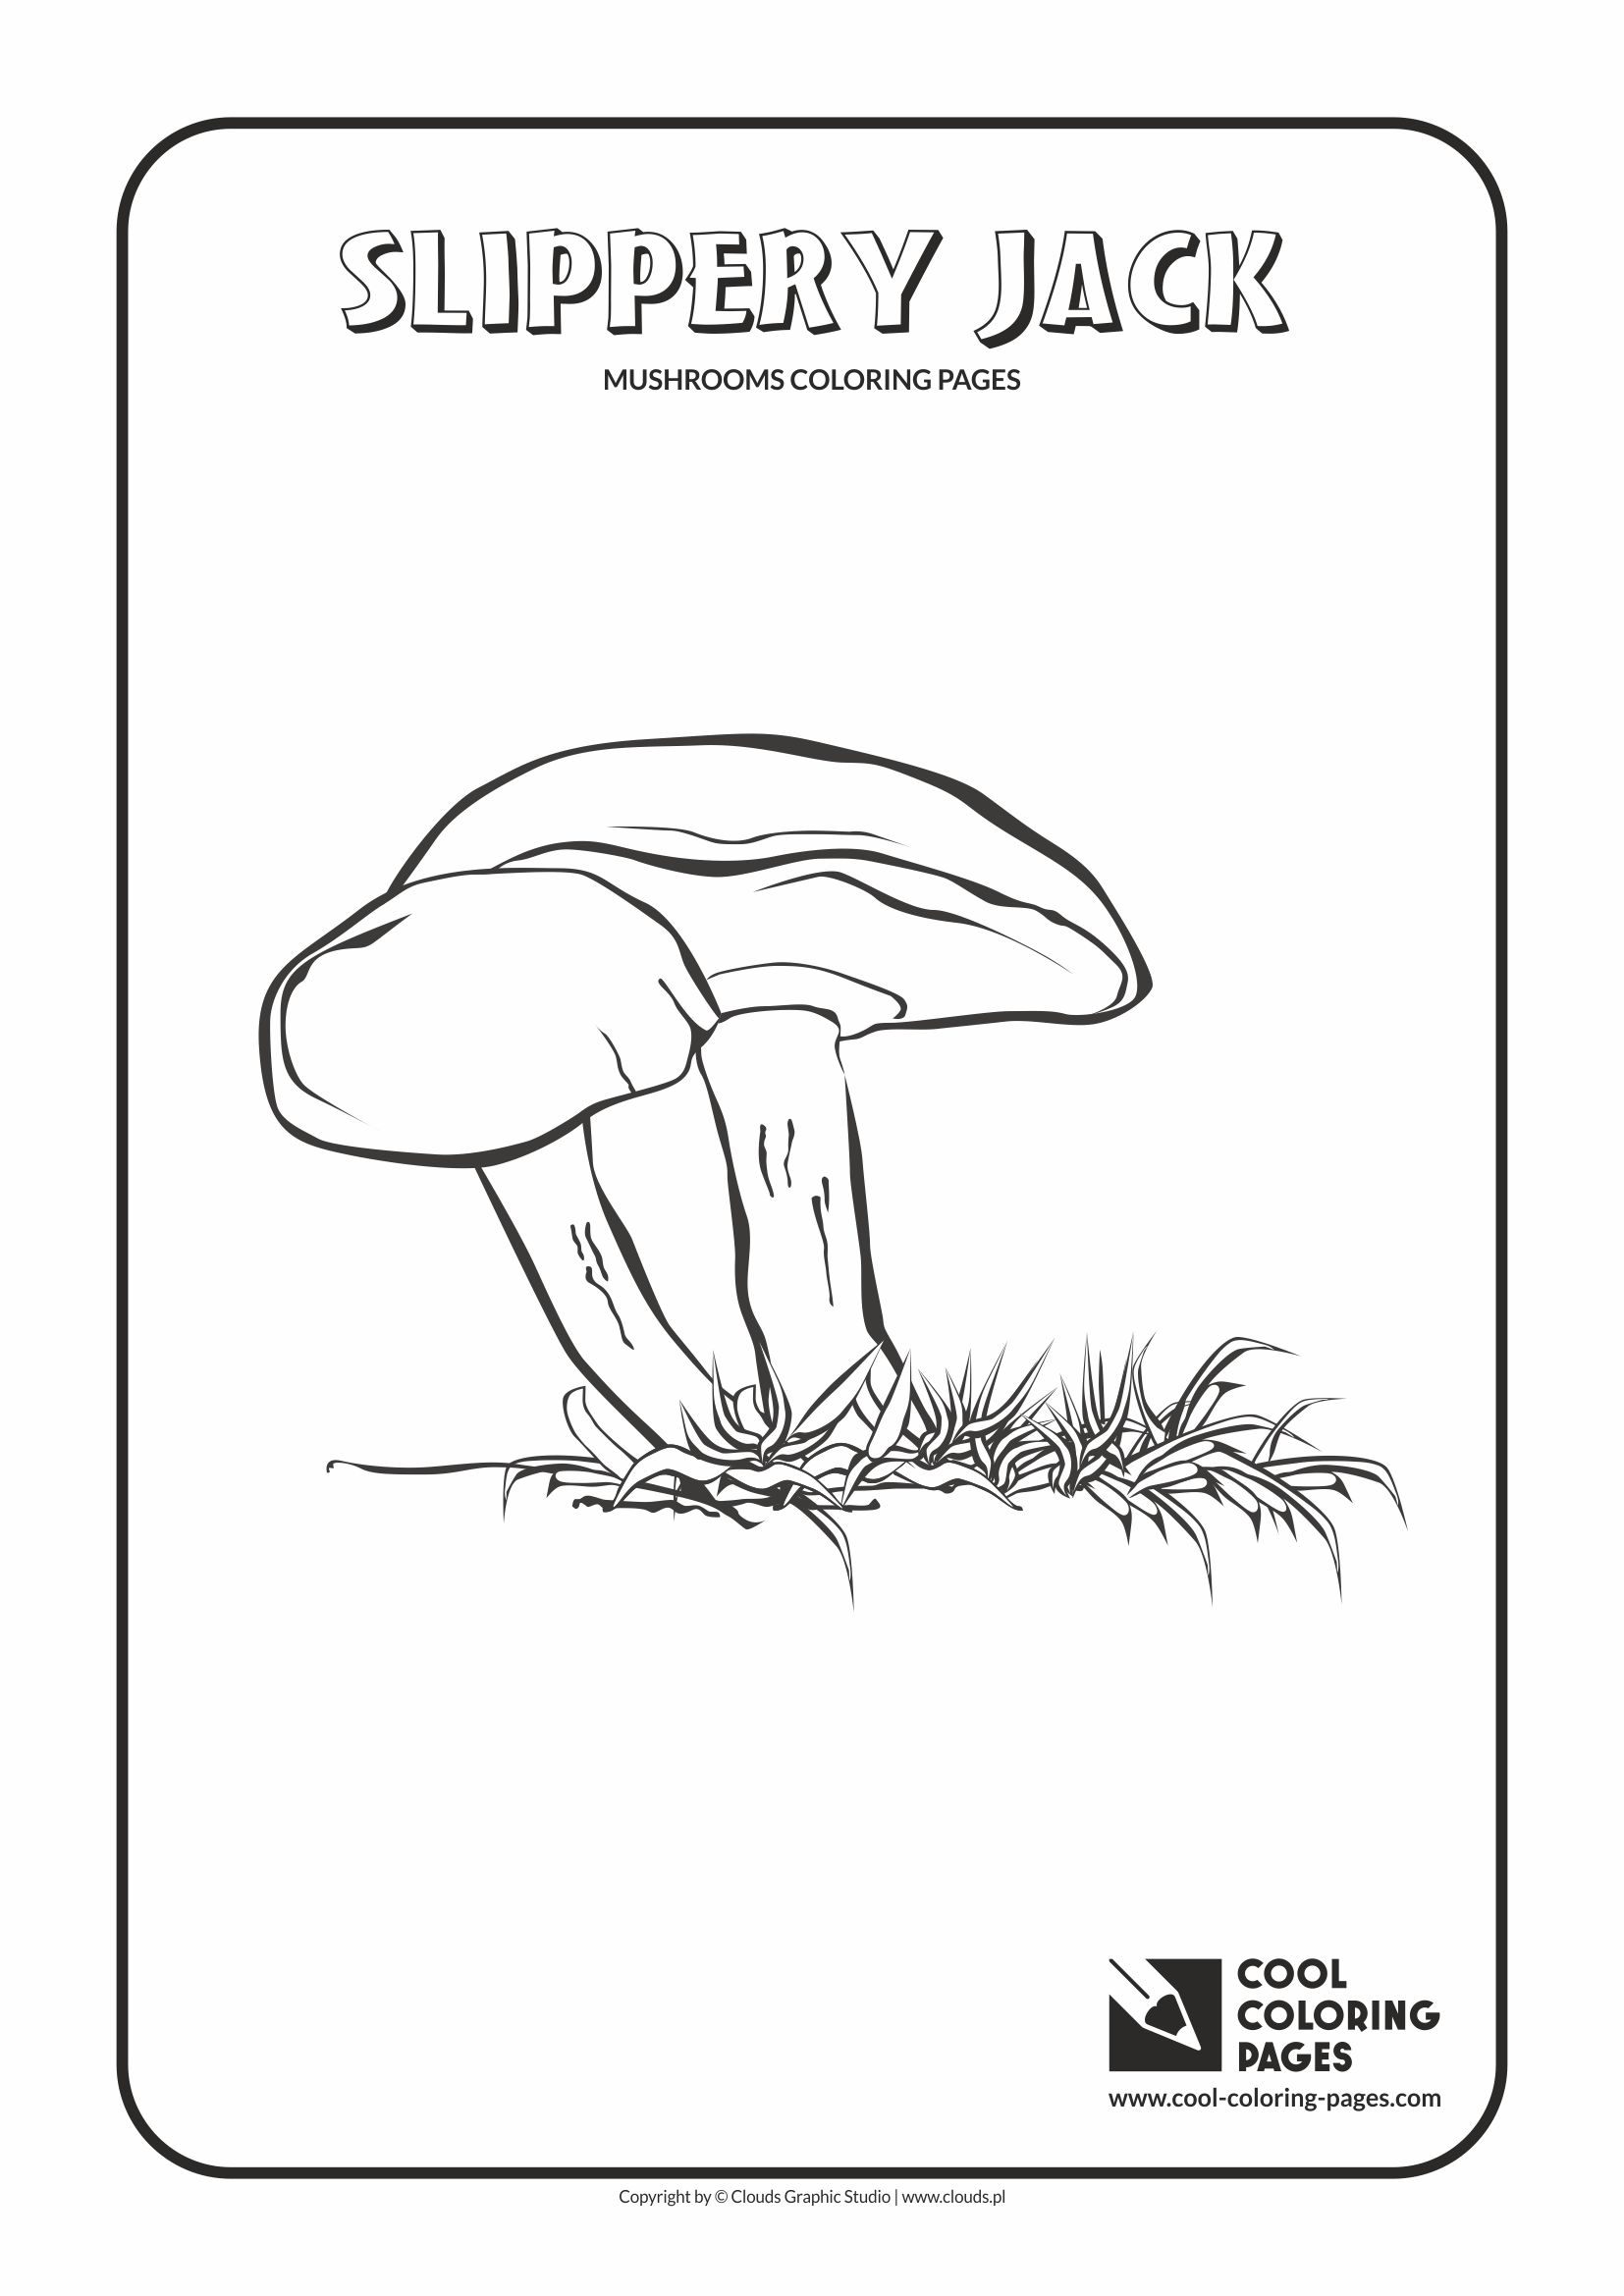 Cool Coloring Pages - Mushrooms / Slippery jack / Coloring page with slippery jack